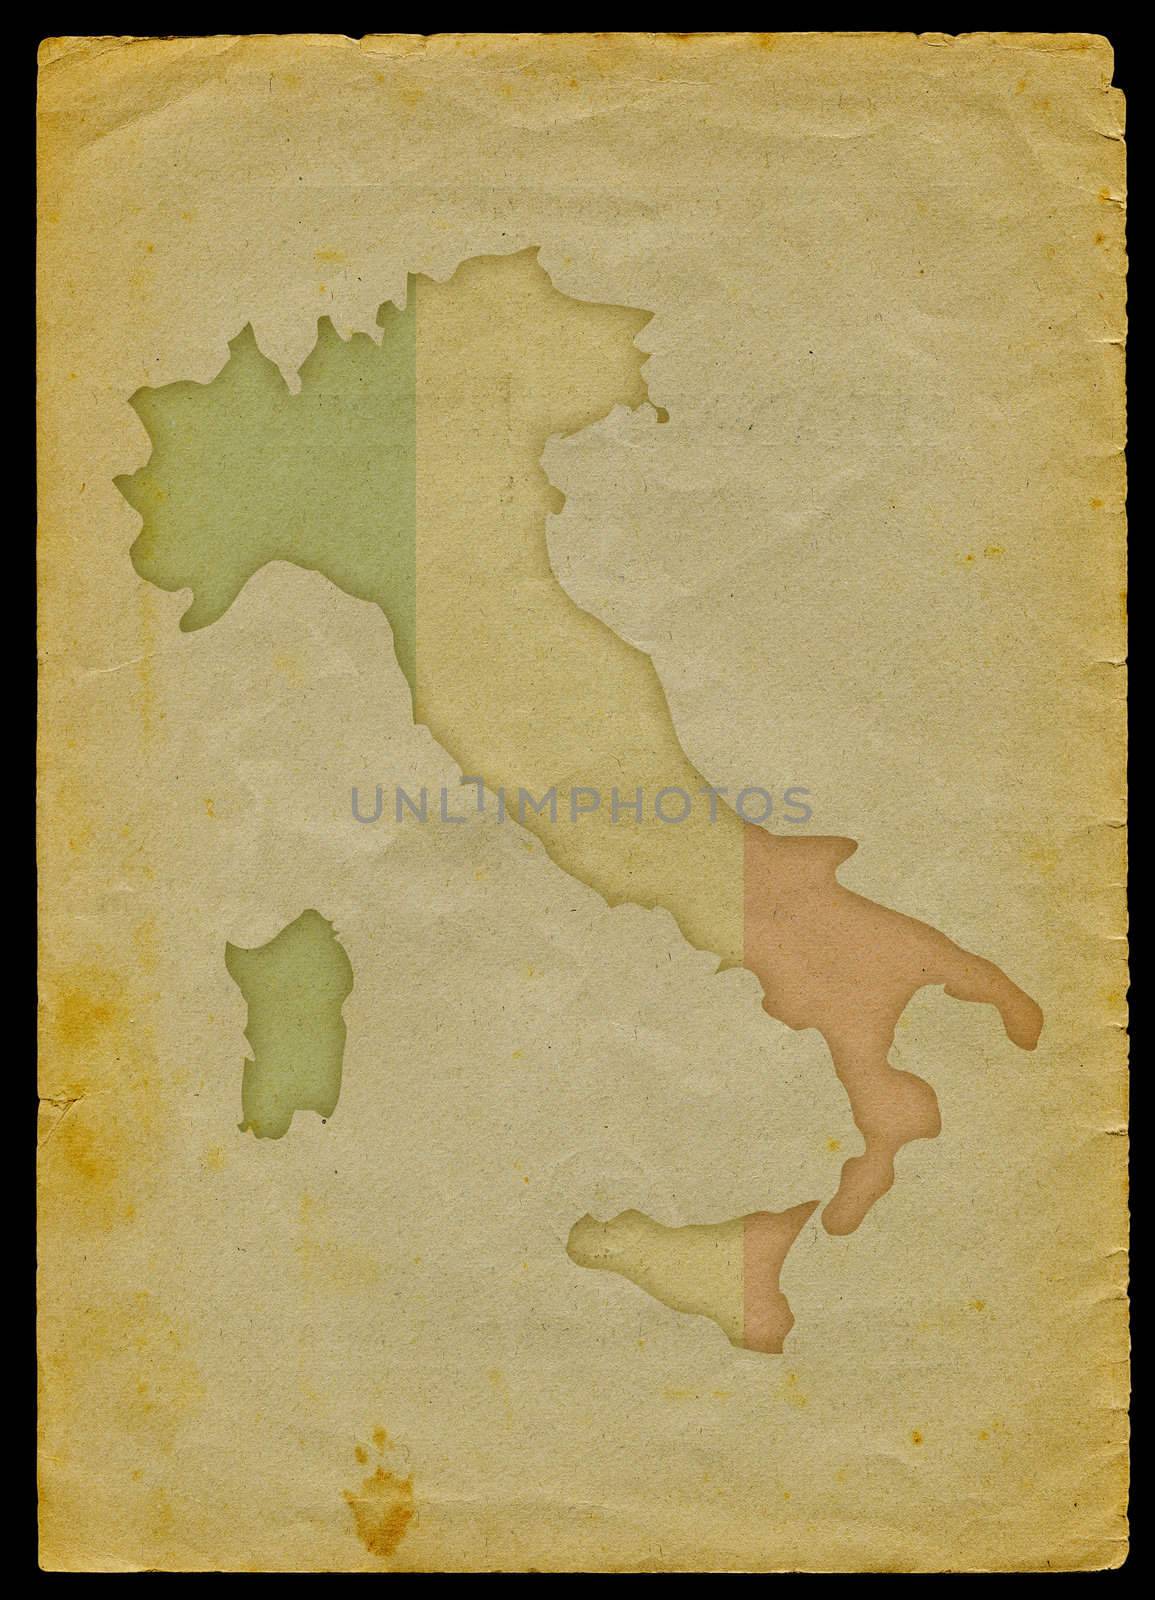 Italy map with flag inside engraved on a old paper page.
Clipping path of the map is included

the source of the image was taken from: 
http://www.lib.utexas.edu/maps/world_maps/world_pol_2006.pdf